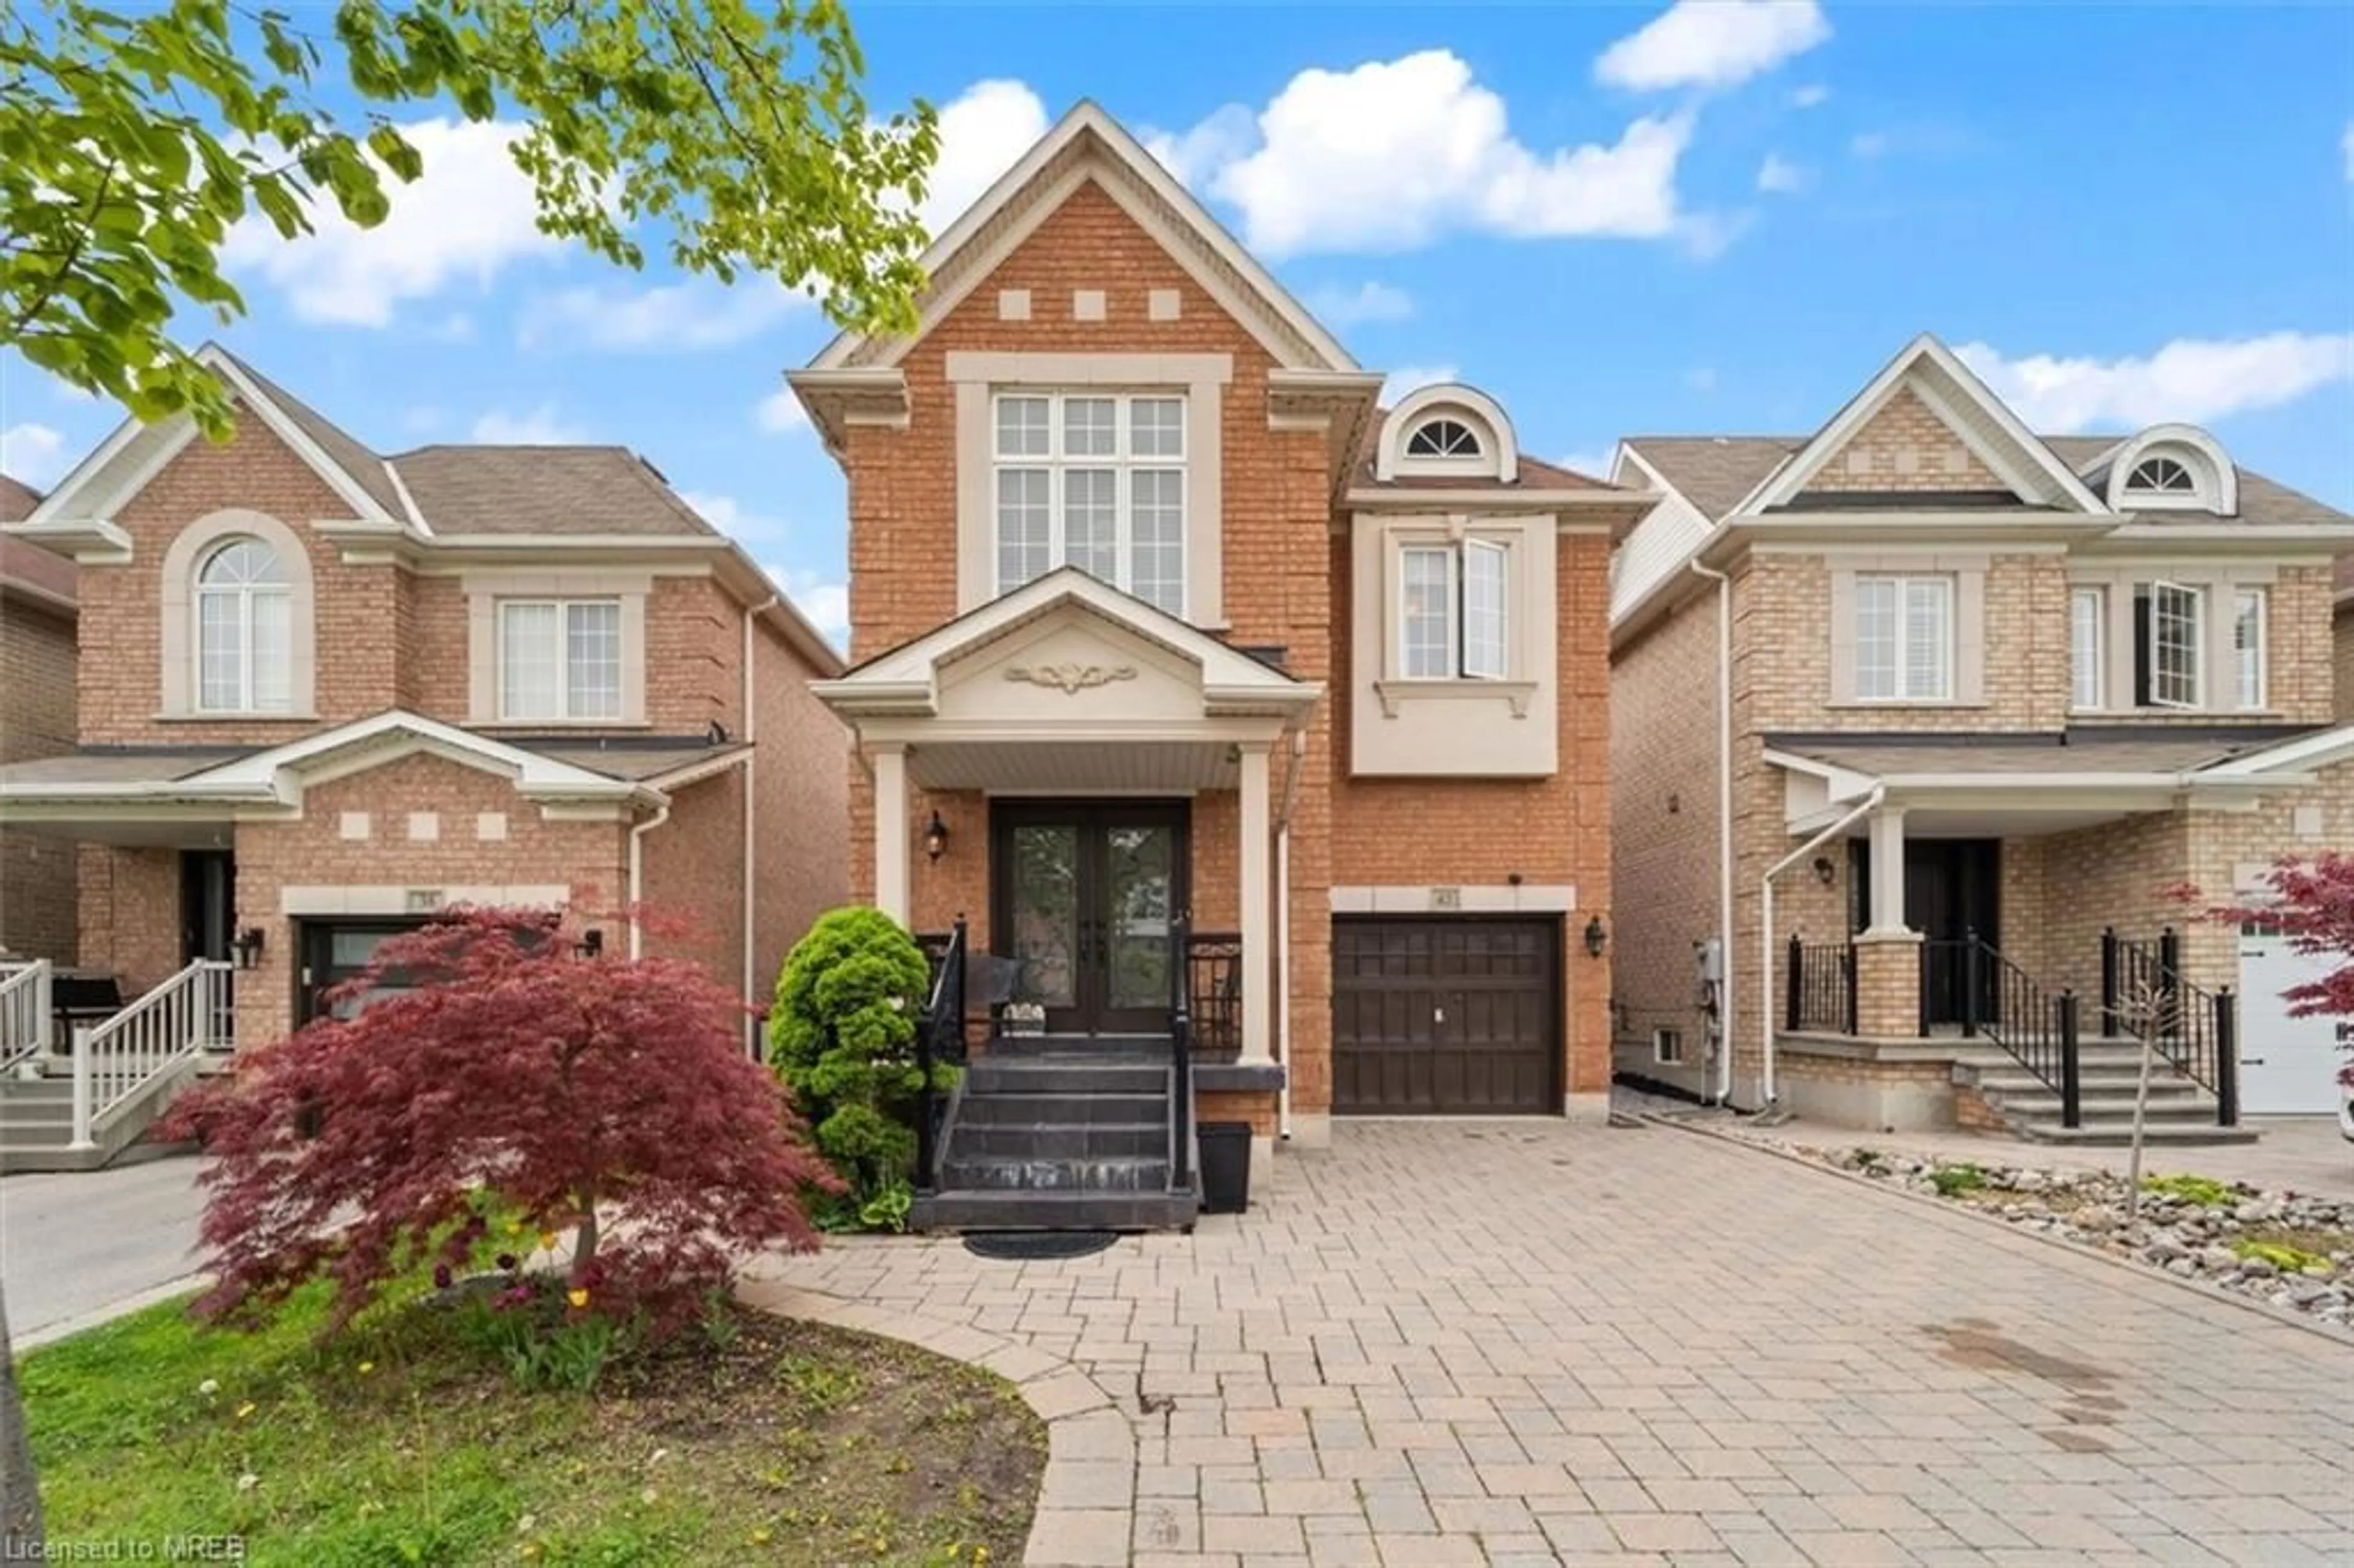 Home with brick exterior material for 42 Boticelli Way, Vaughan Ontario L4H 0C6